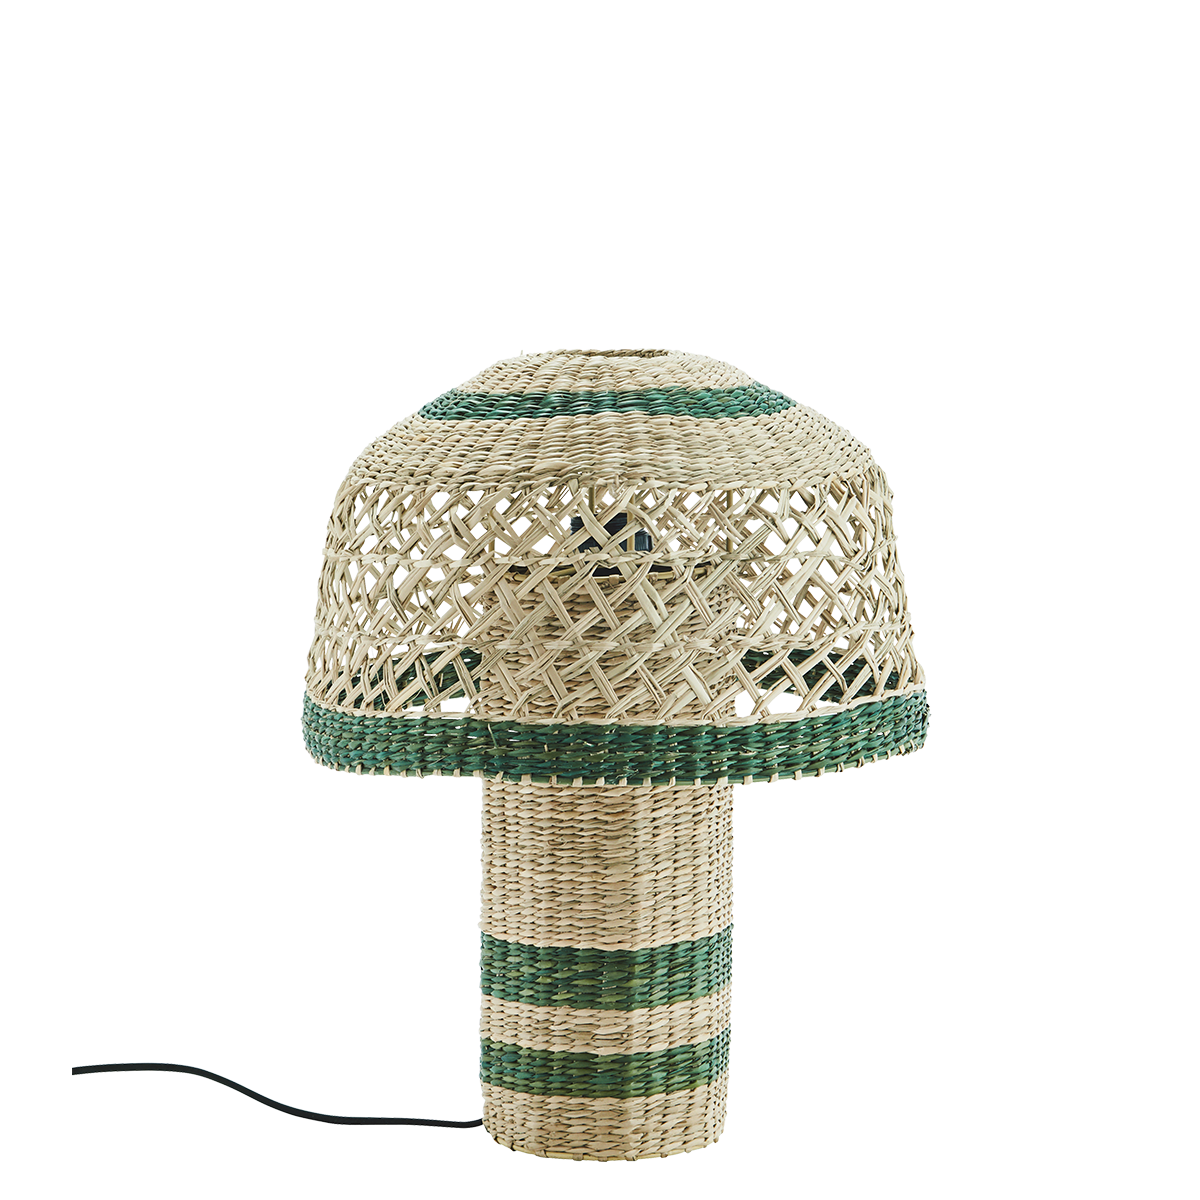 Seagrass table lamp